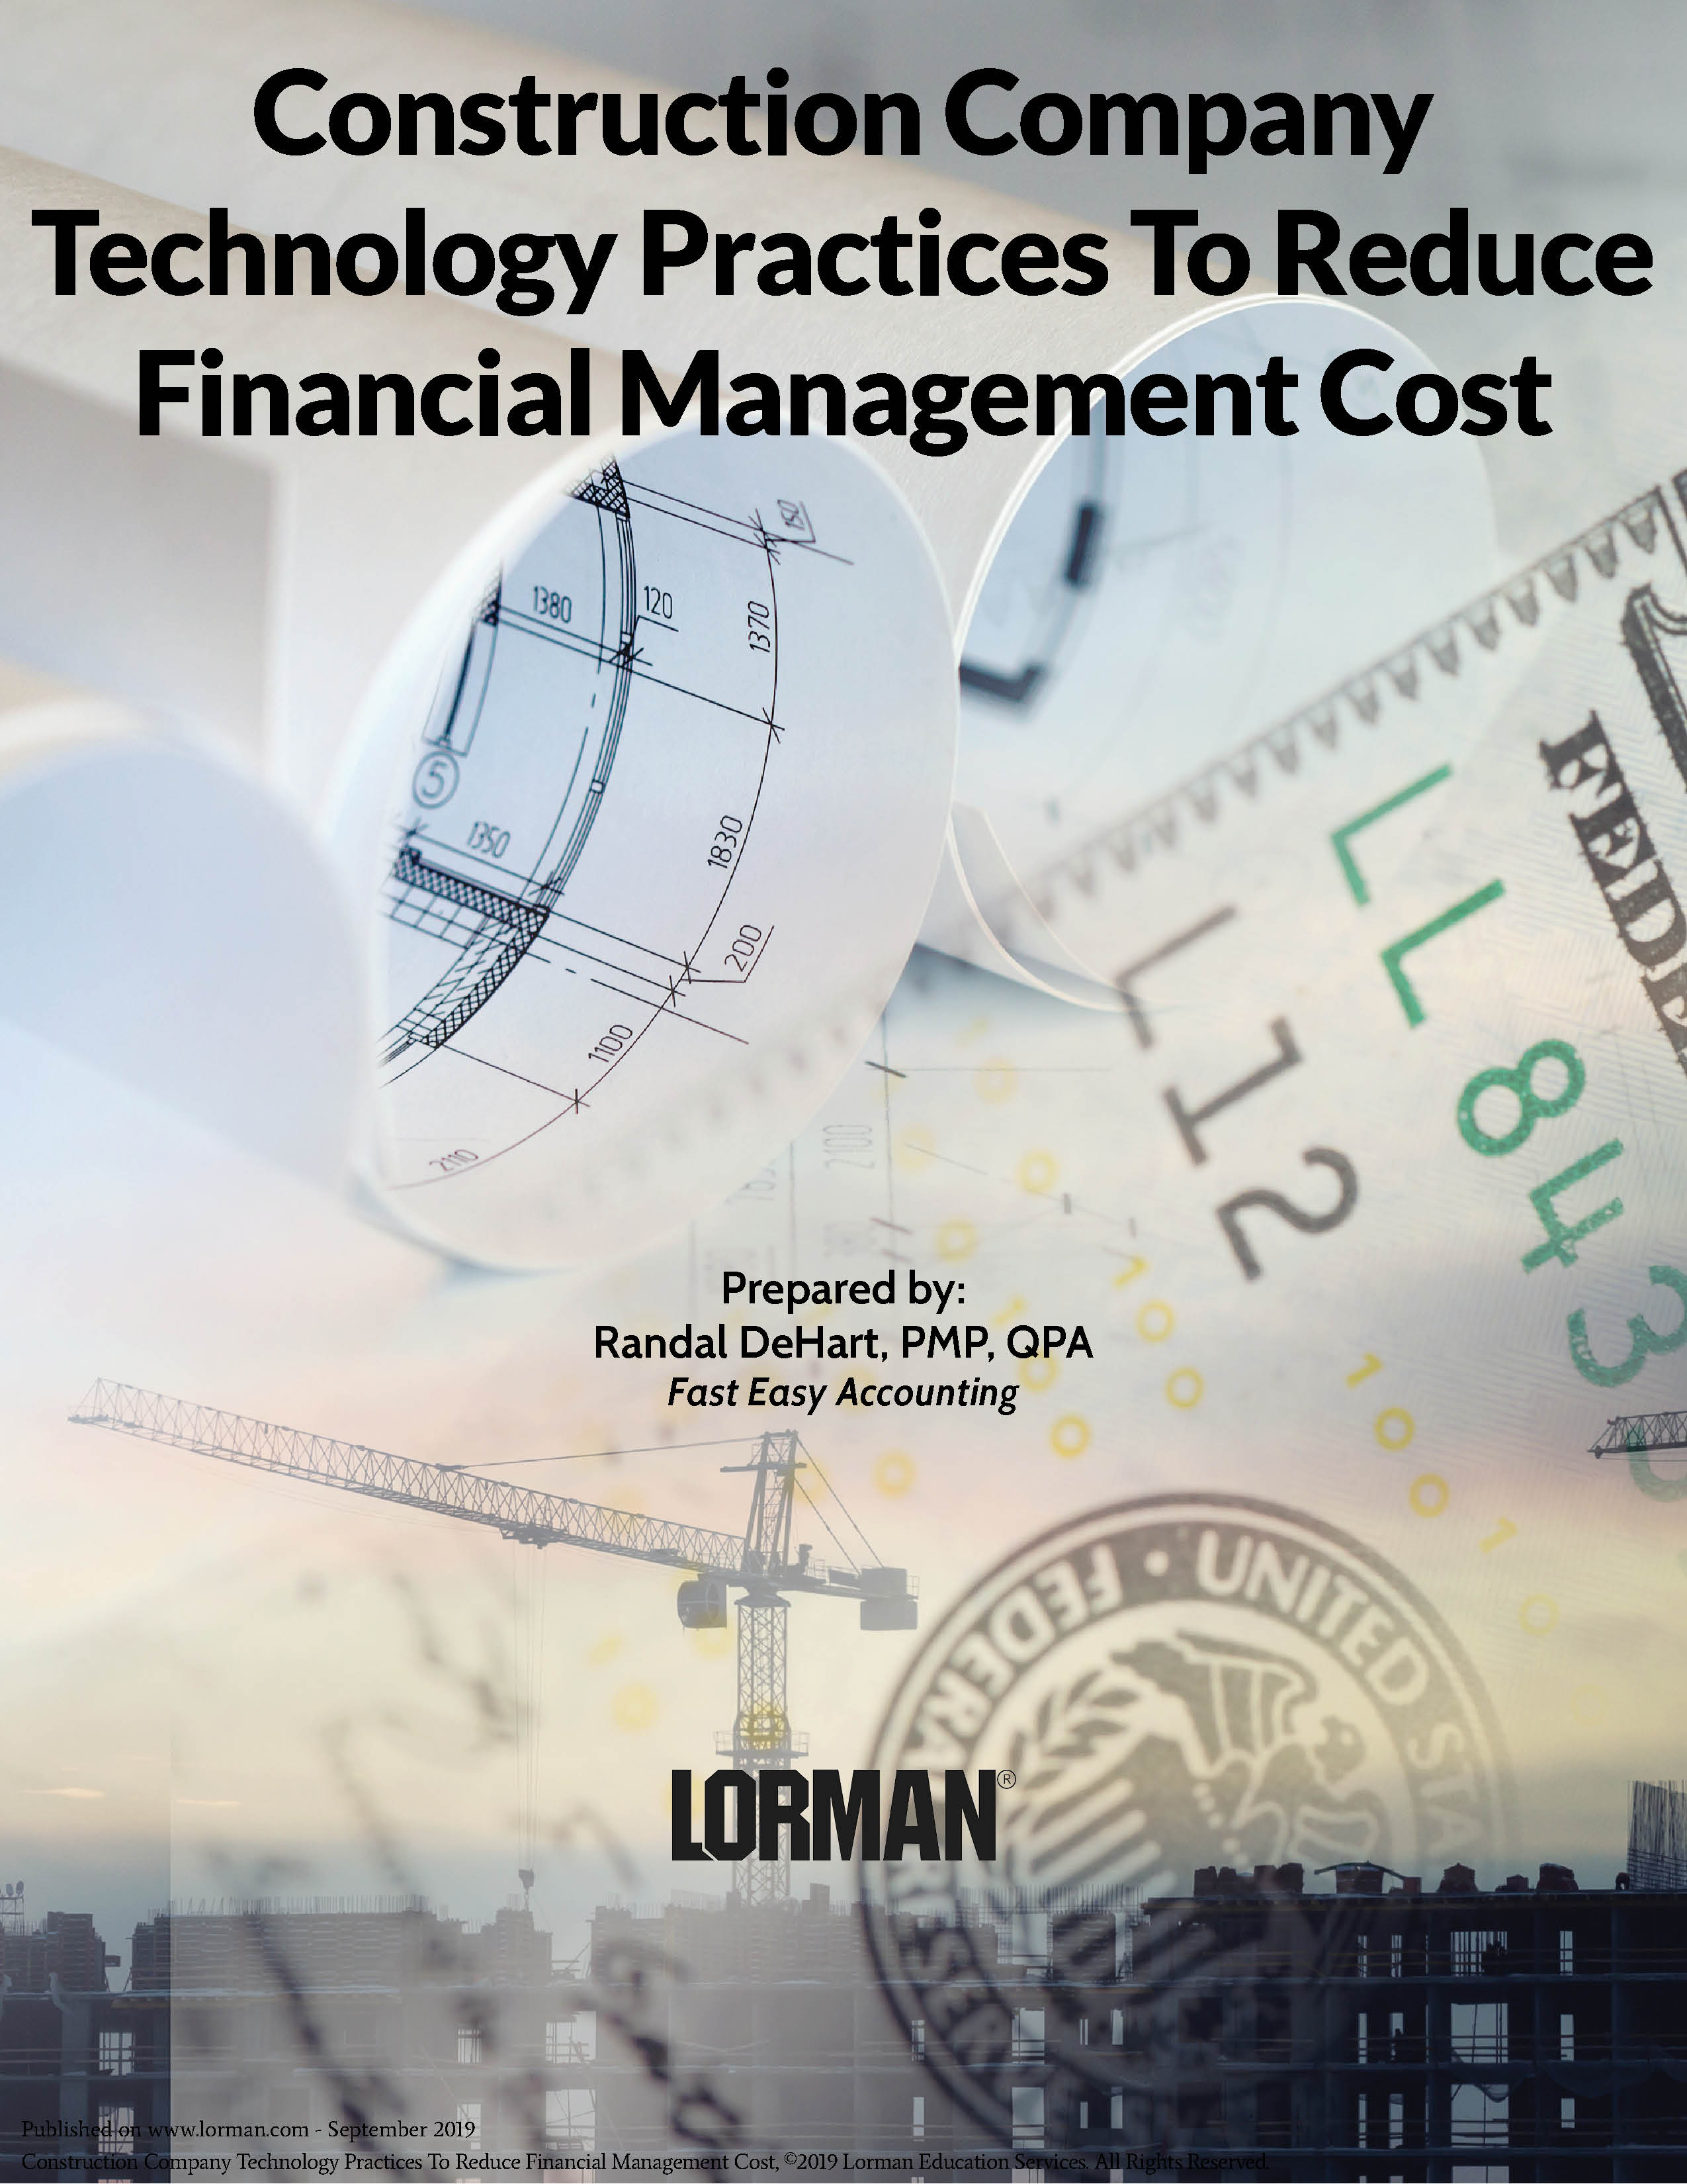 Construction Company Technology Practices To Reduce Financial Management Cost